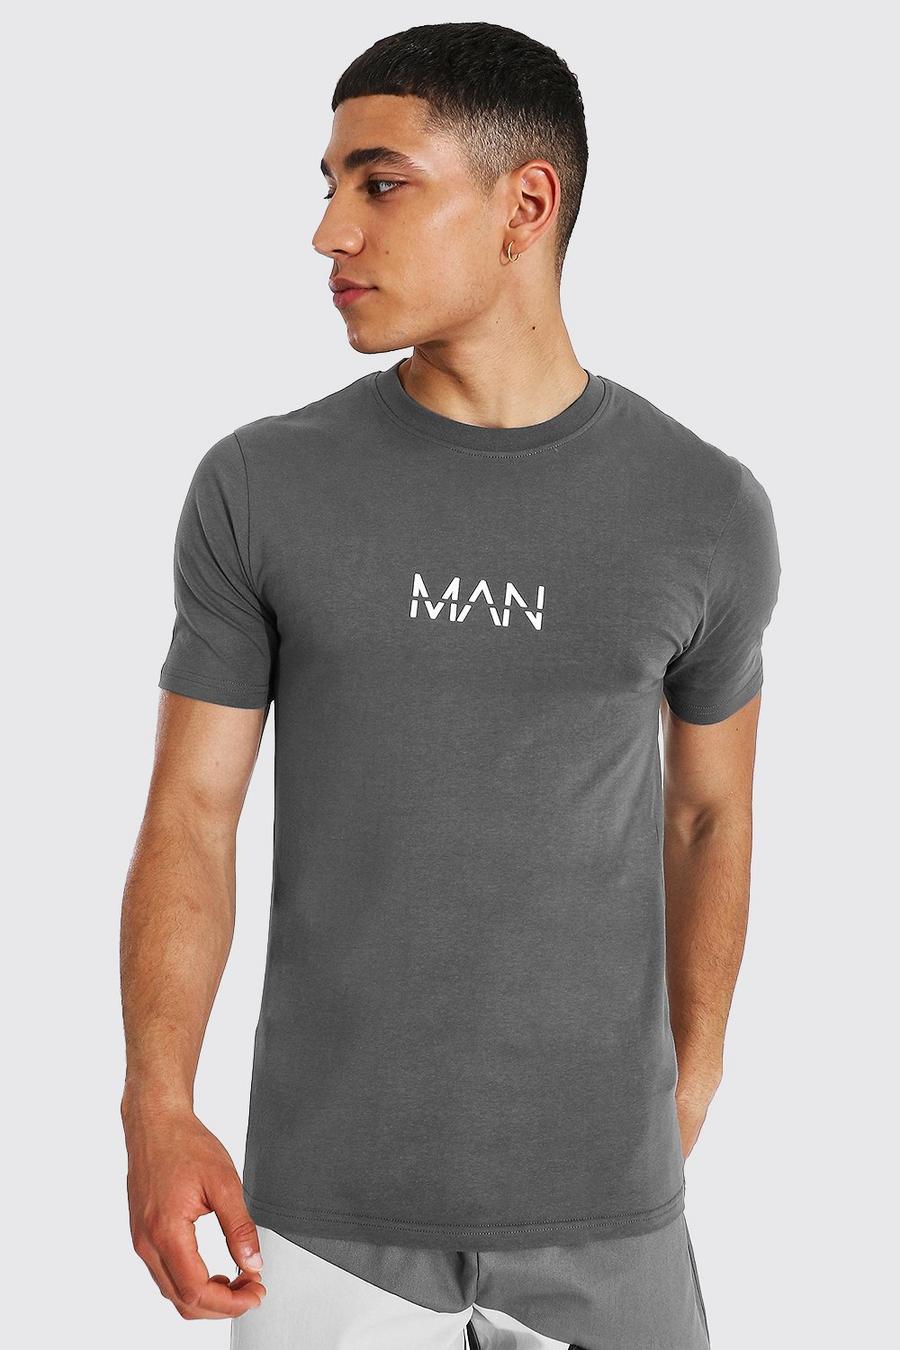 Charcoal Muscle Fit Original Man T-shirt image number 1